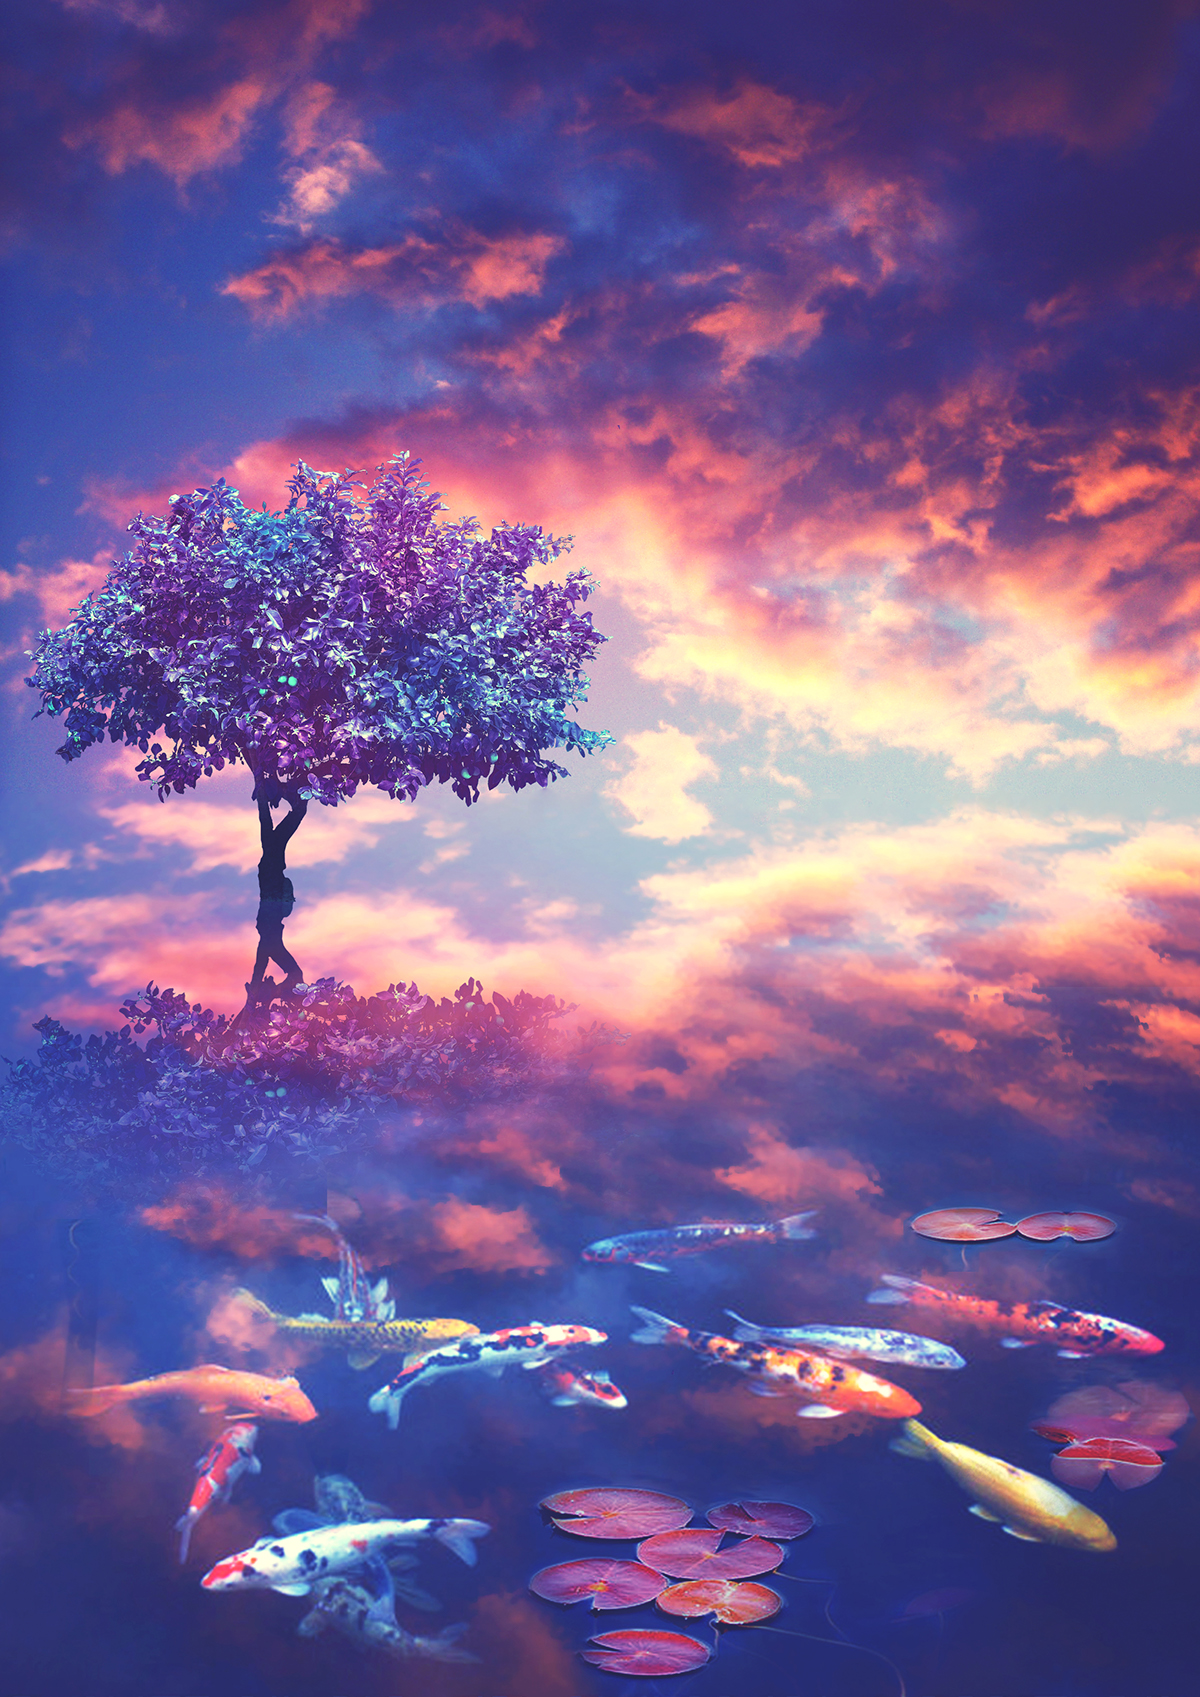 SKY water earth Love ground pink trees